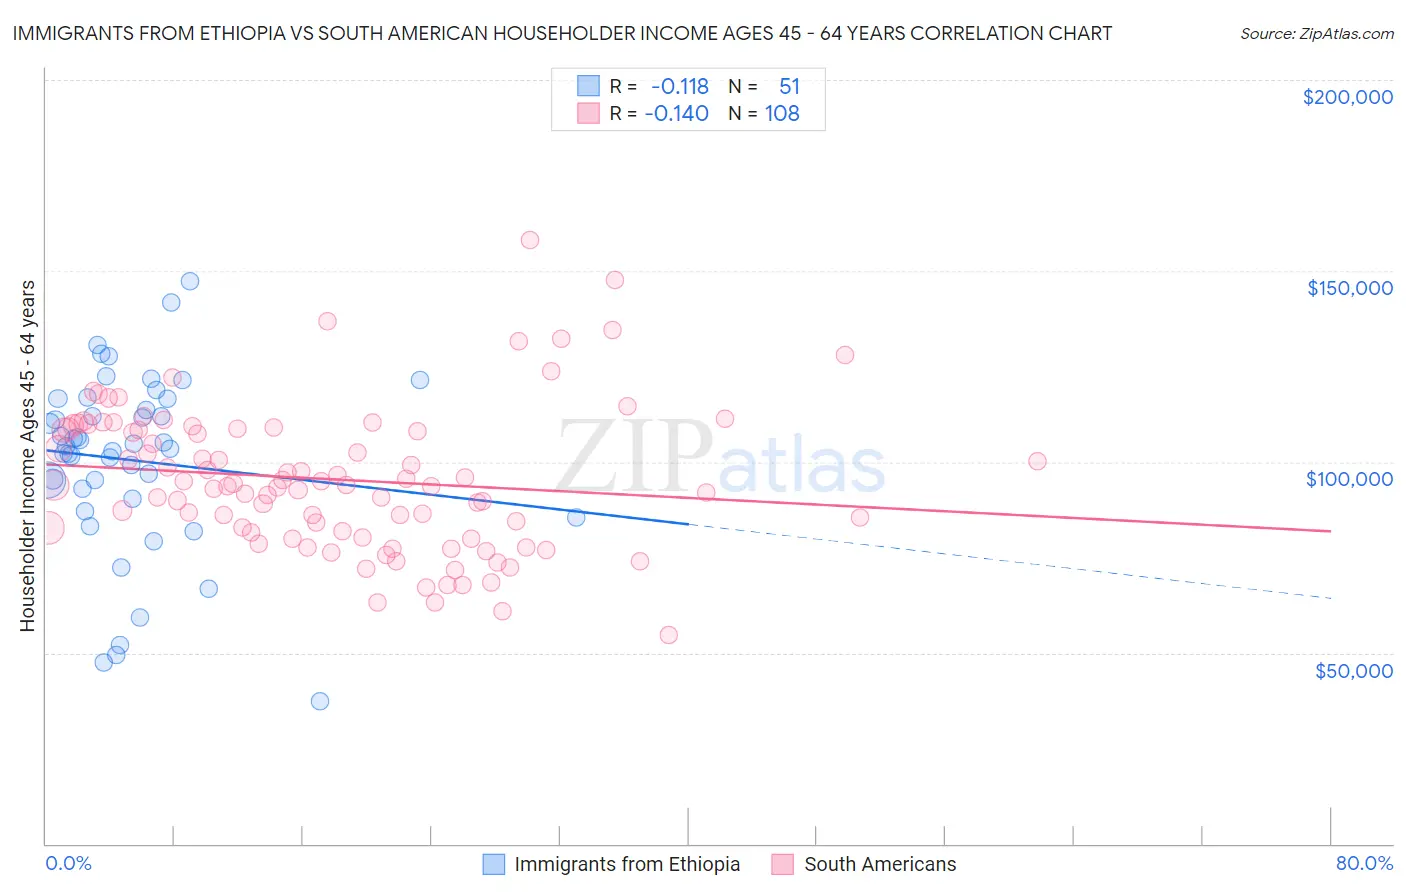 Immigrants from Ethiopia vs South American Householder Income Ages 45 - 64 years